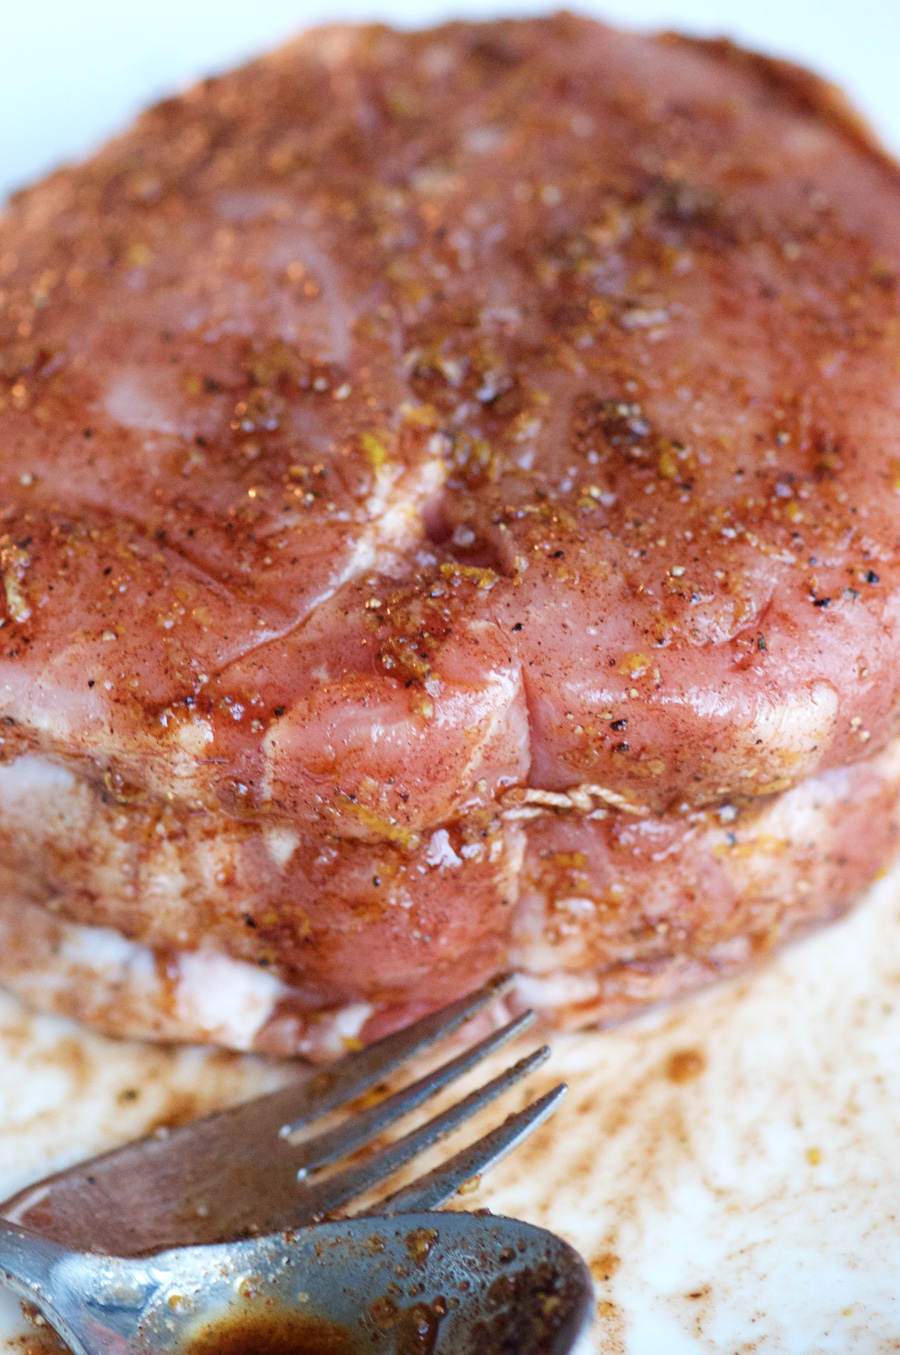 The rub is applied generously to the pork roast